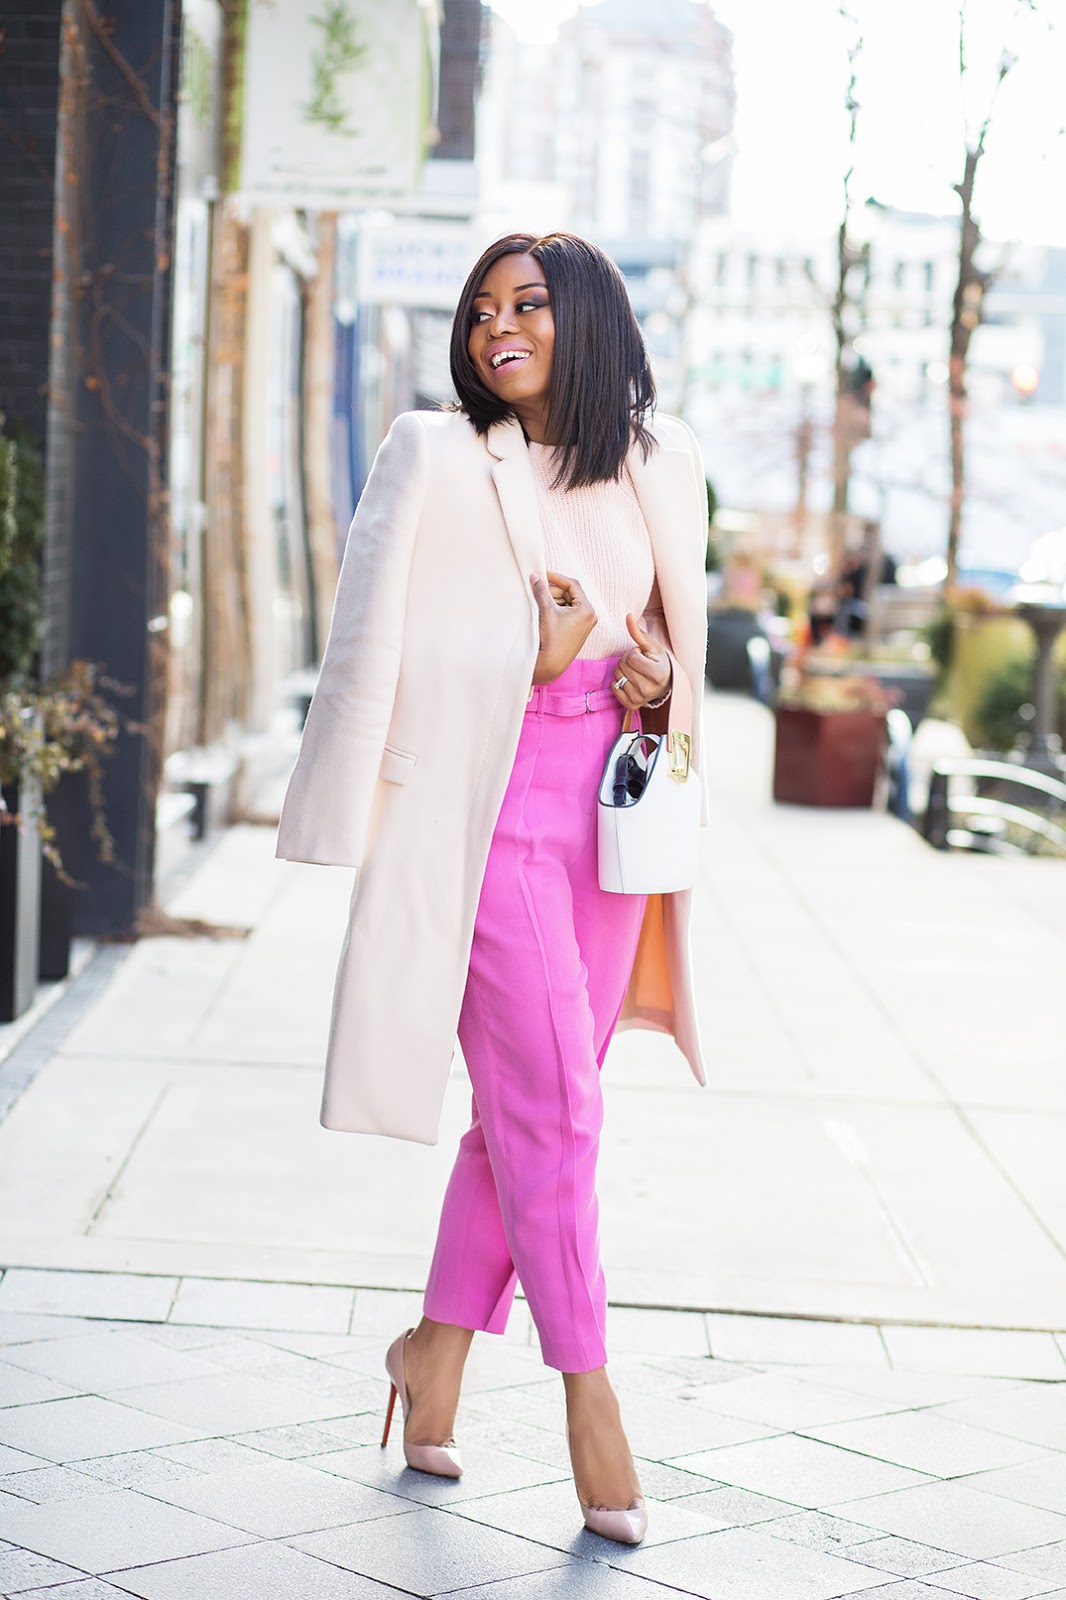 stella-adewunmi-shares-shades-of-pink-for-valentines-day